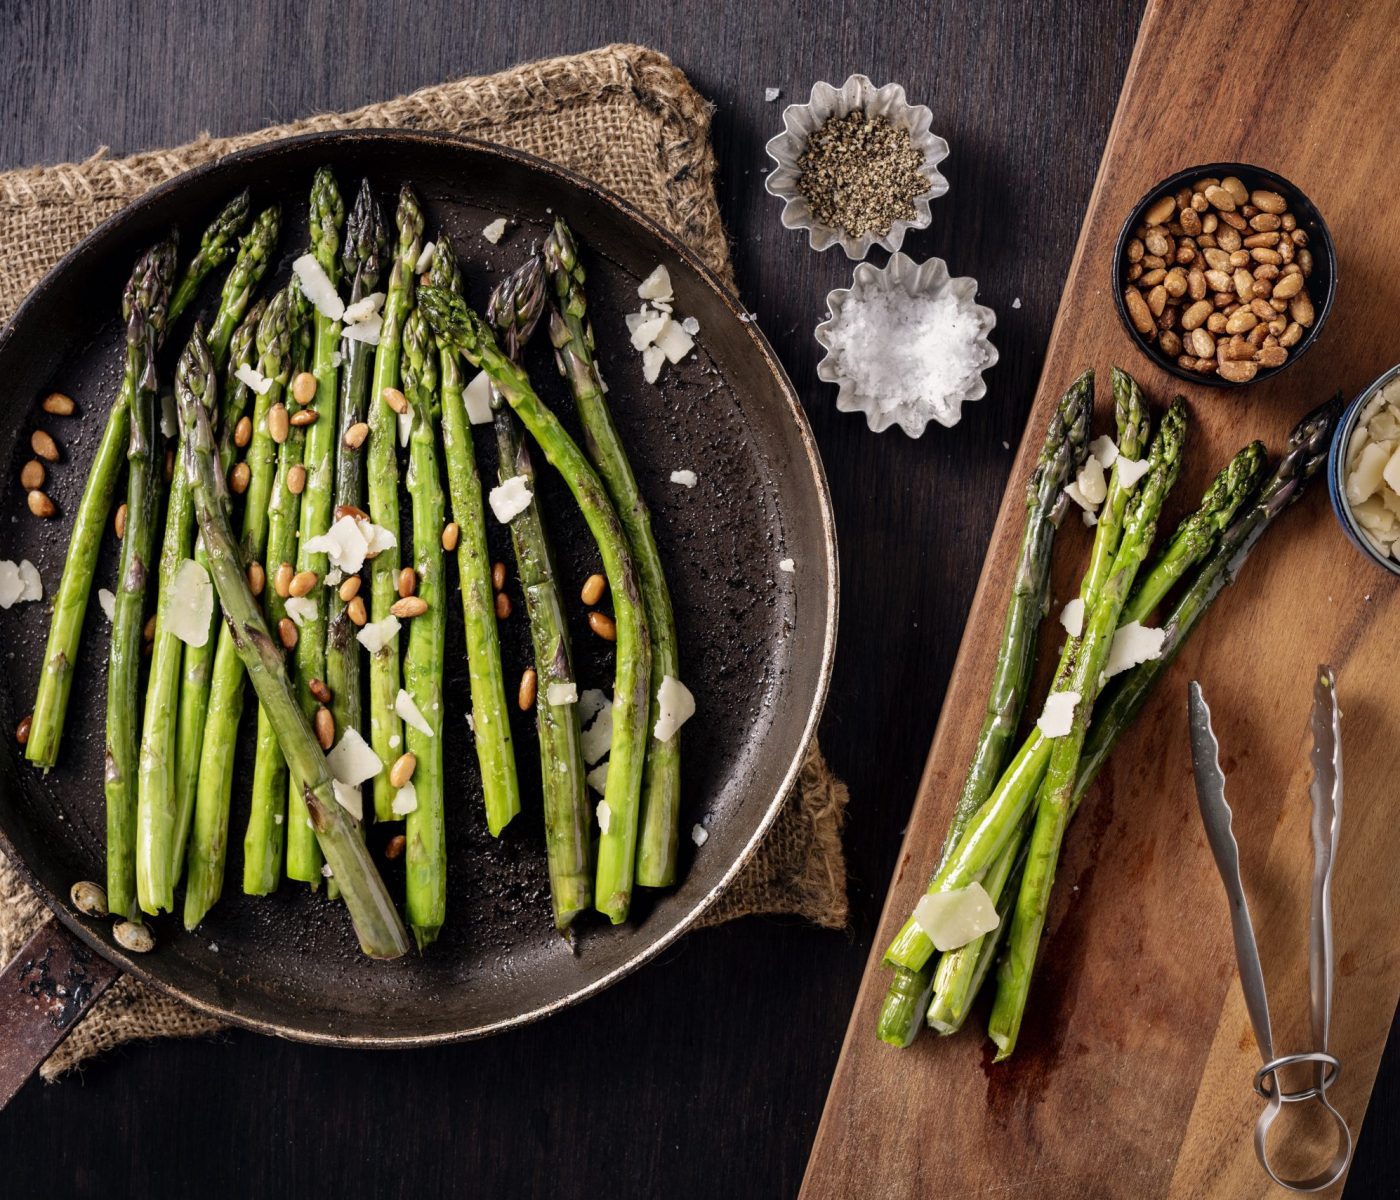 Pan fried asparagus served from the skillet. Cooked with a tiny bit of oil or butter just give a bit of colour and taste to the asparagus stems. Served with; pine nuts, vegan parmesan cheese and salt and pepper.Overhead view, horizontal format with some copy space.